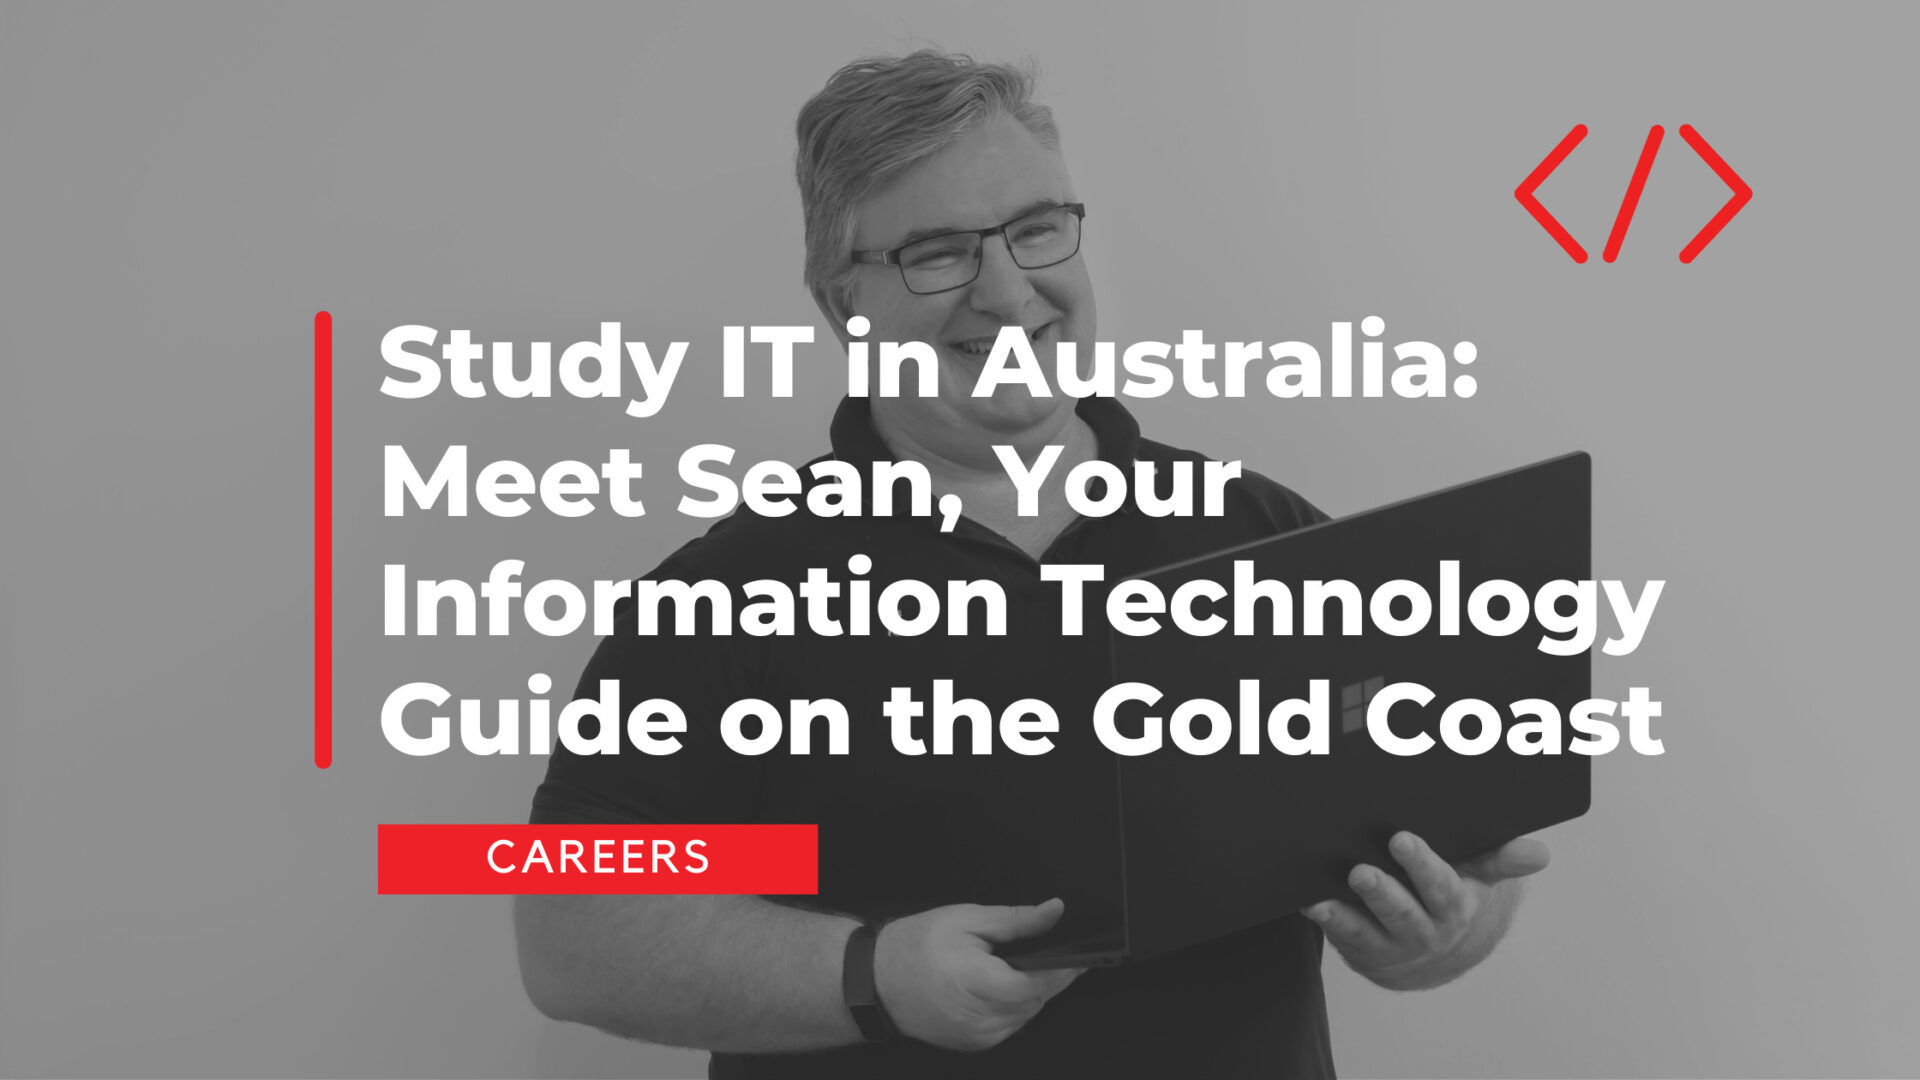 Study IT in Australia: Meet Sean, Your Information Technology Guide on the Gold Coast